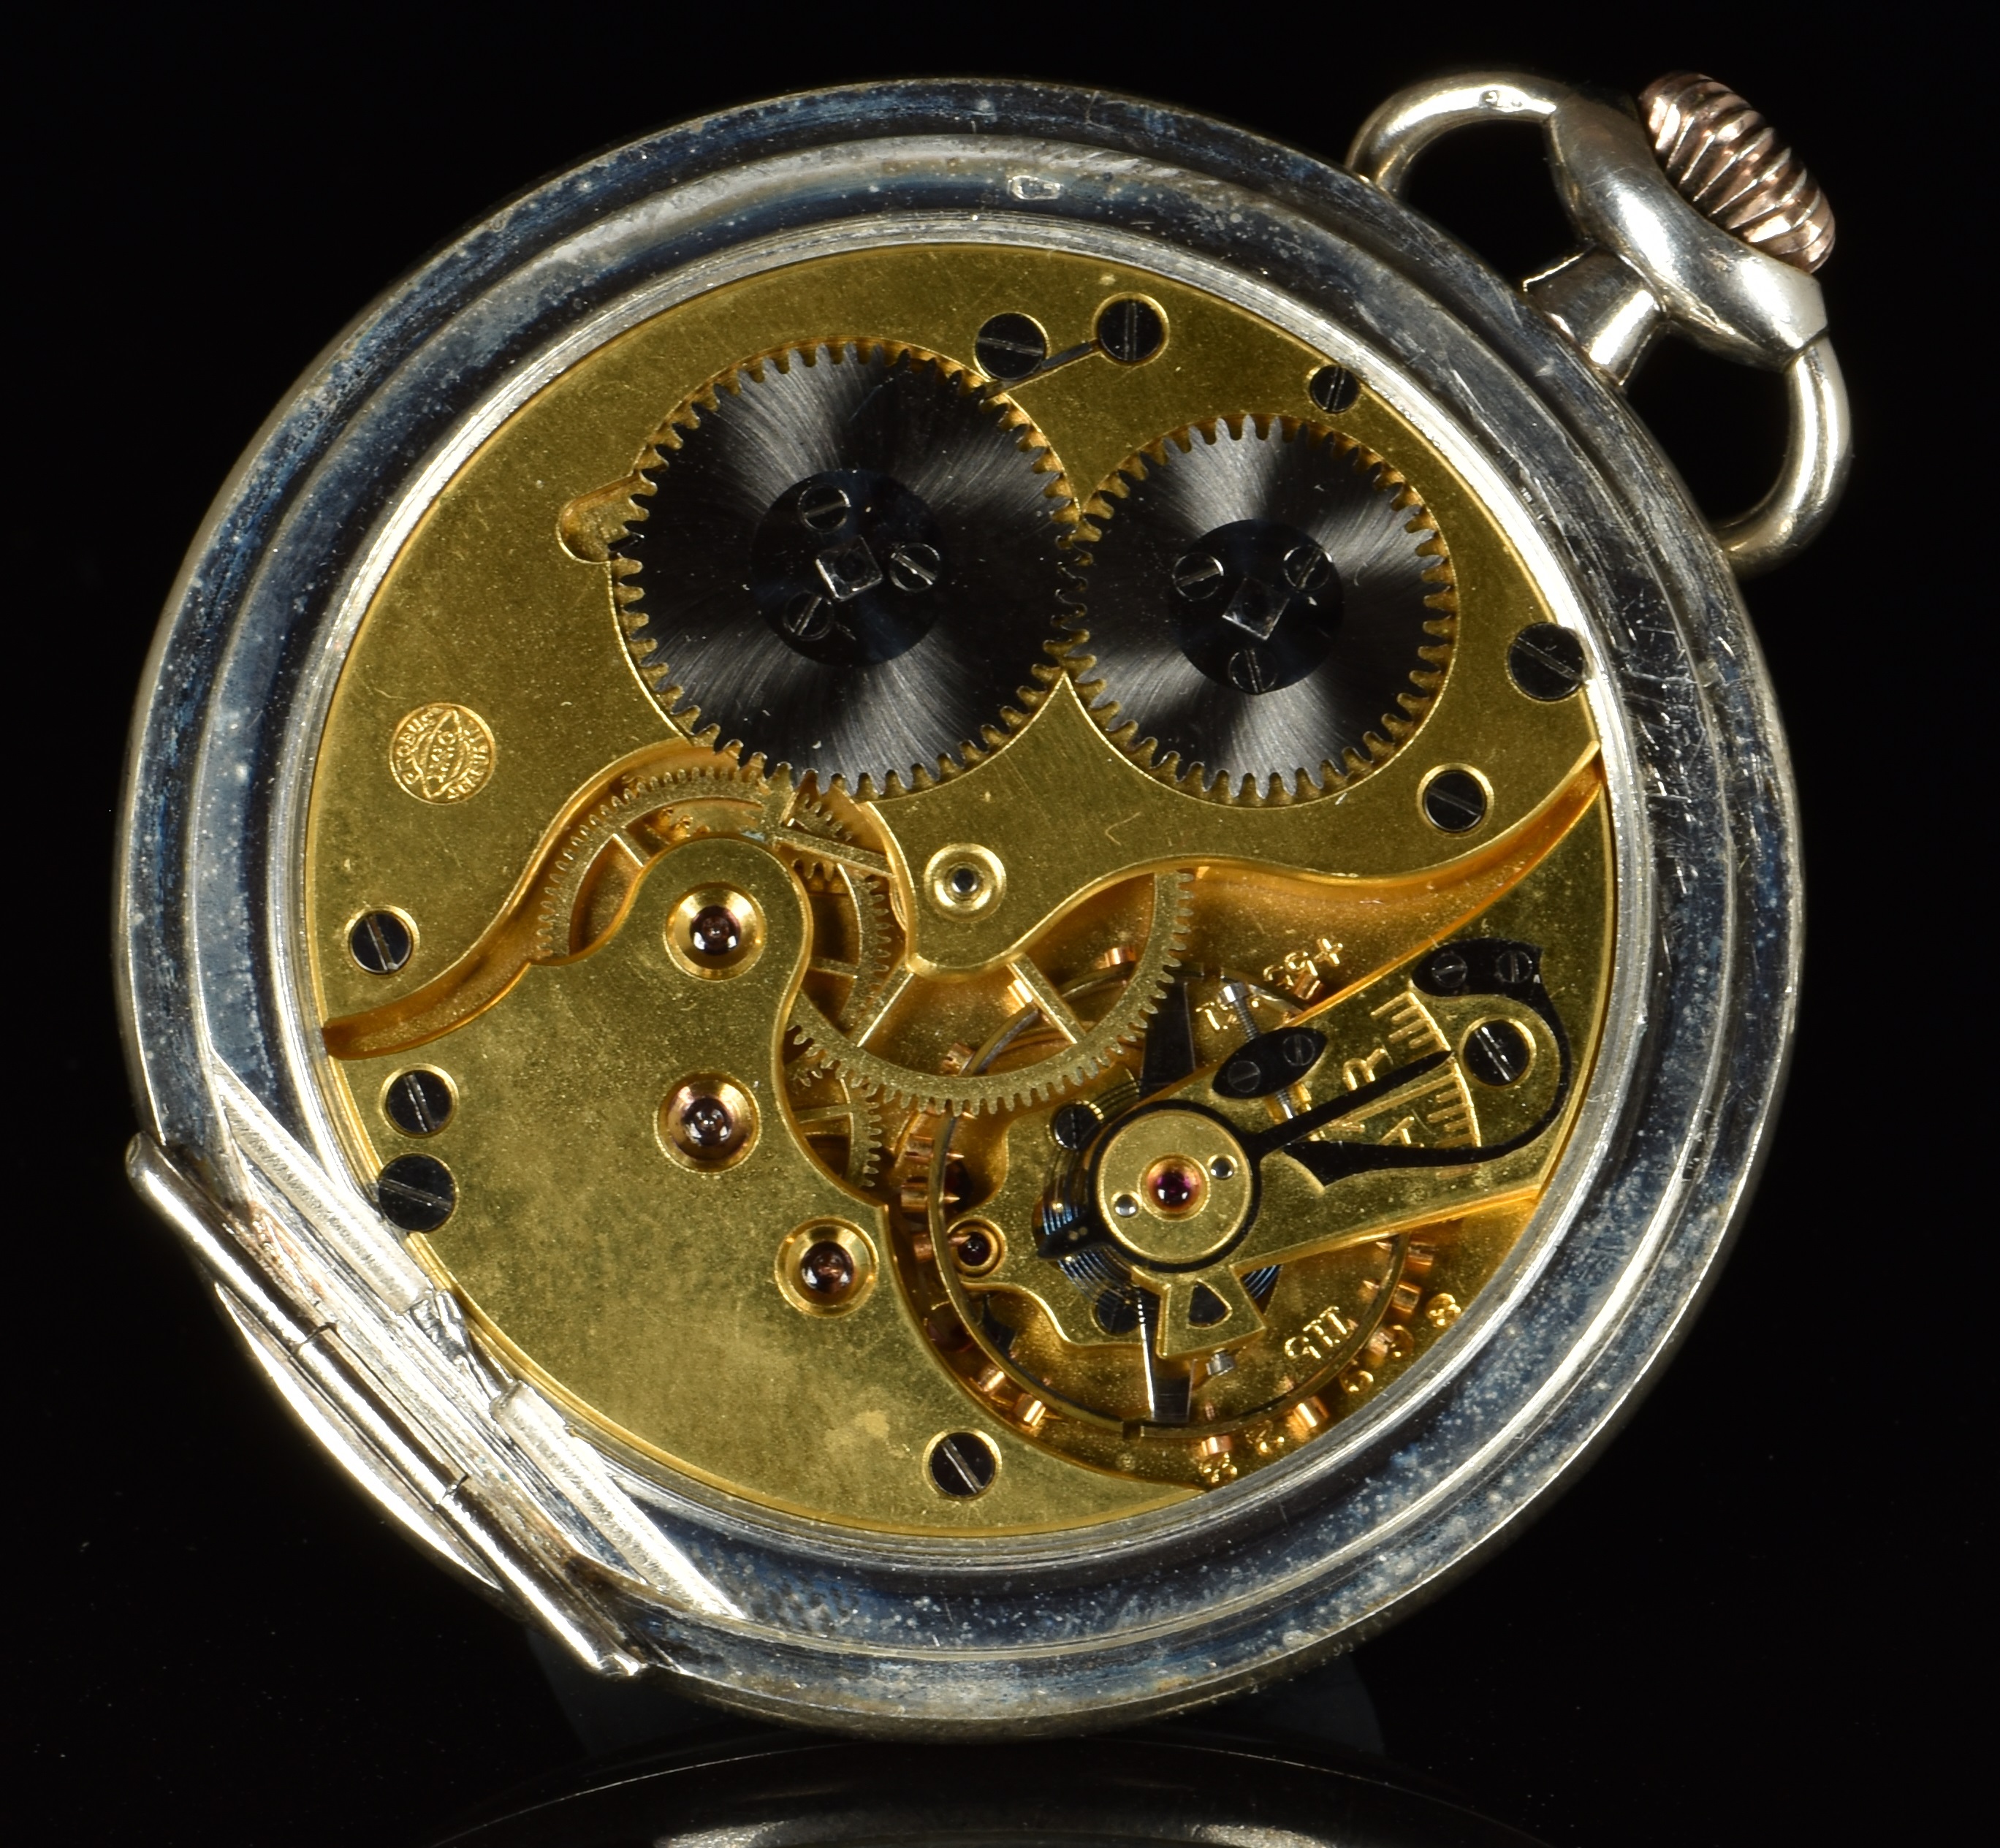 International Watch Company (IWC) silver keyless winding open faced pocket watch with subsidiary - Image 3 of 3